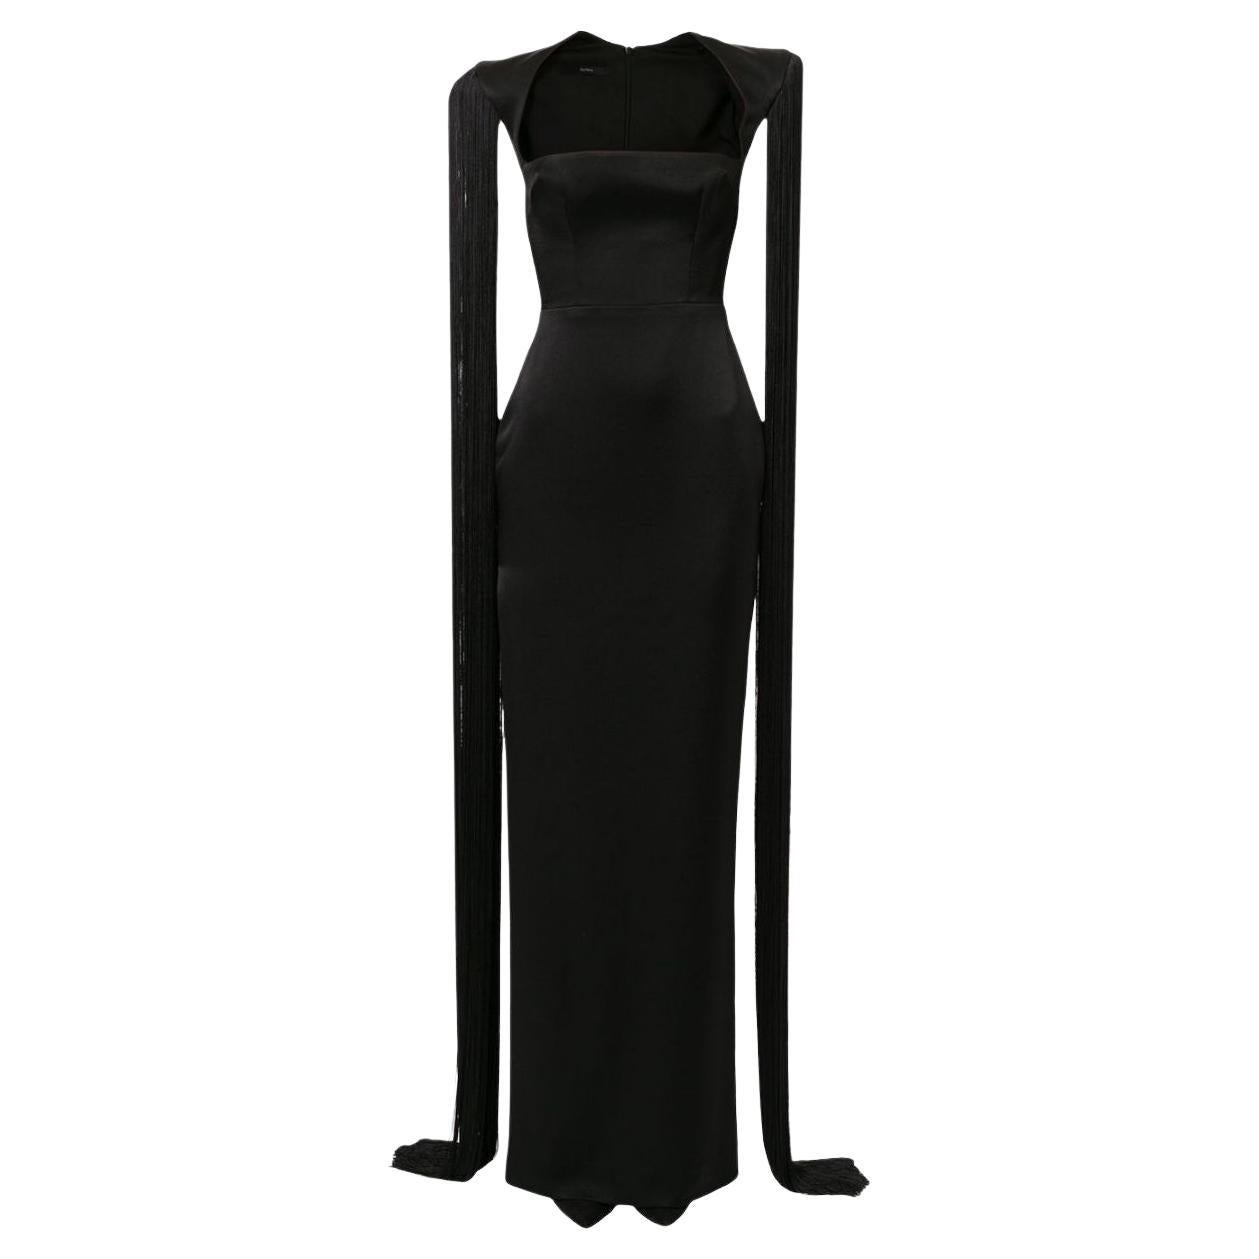 Hire Alex Perry Dresses Online  Dress for a Night  Dress for a Night